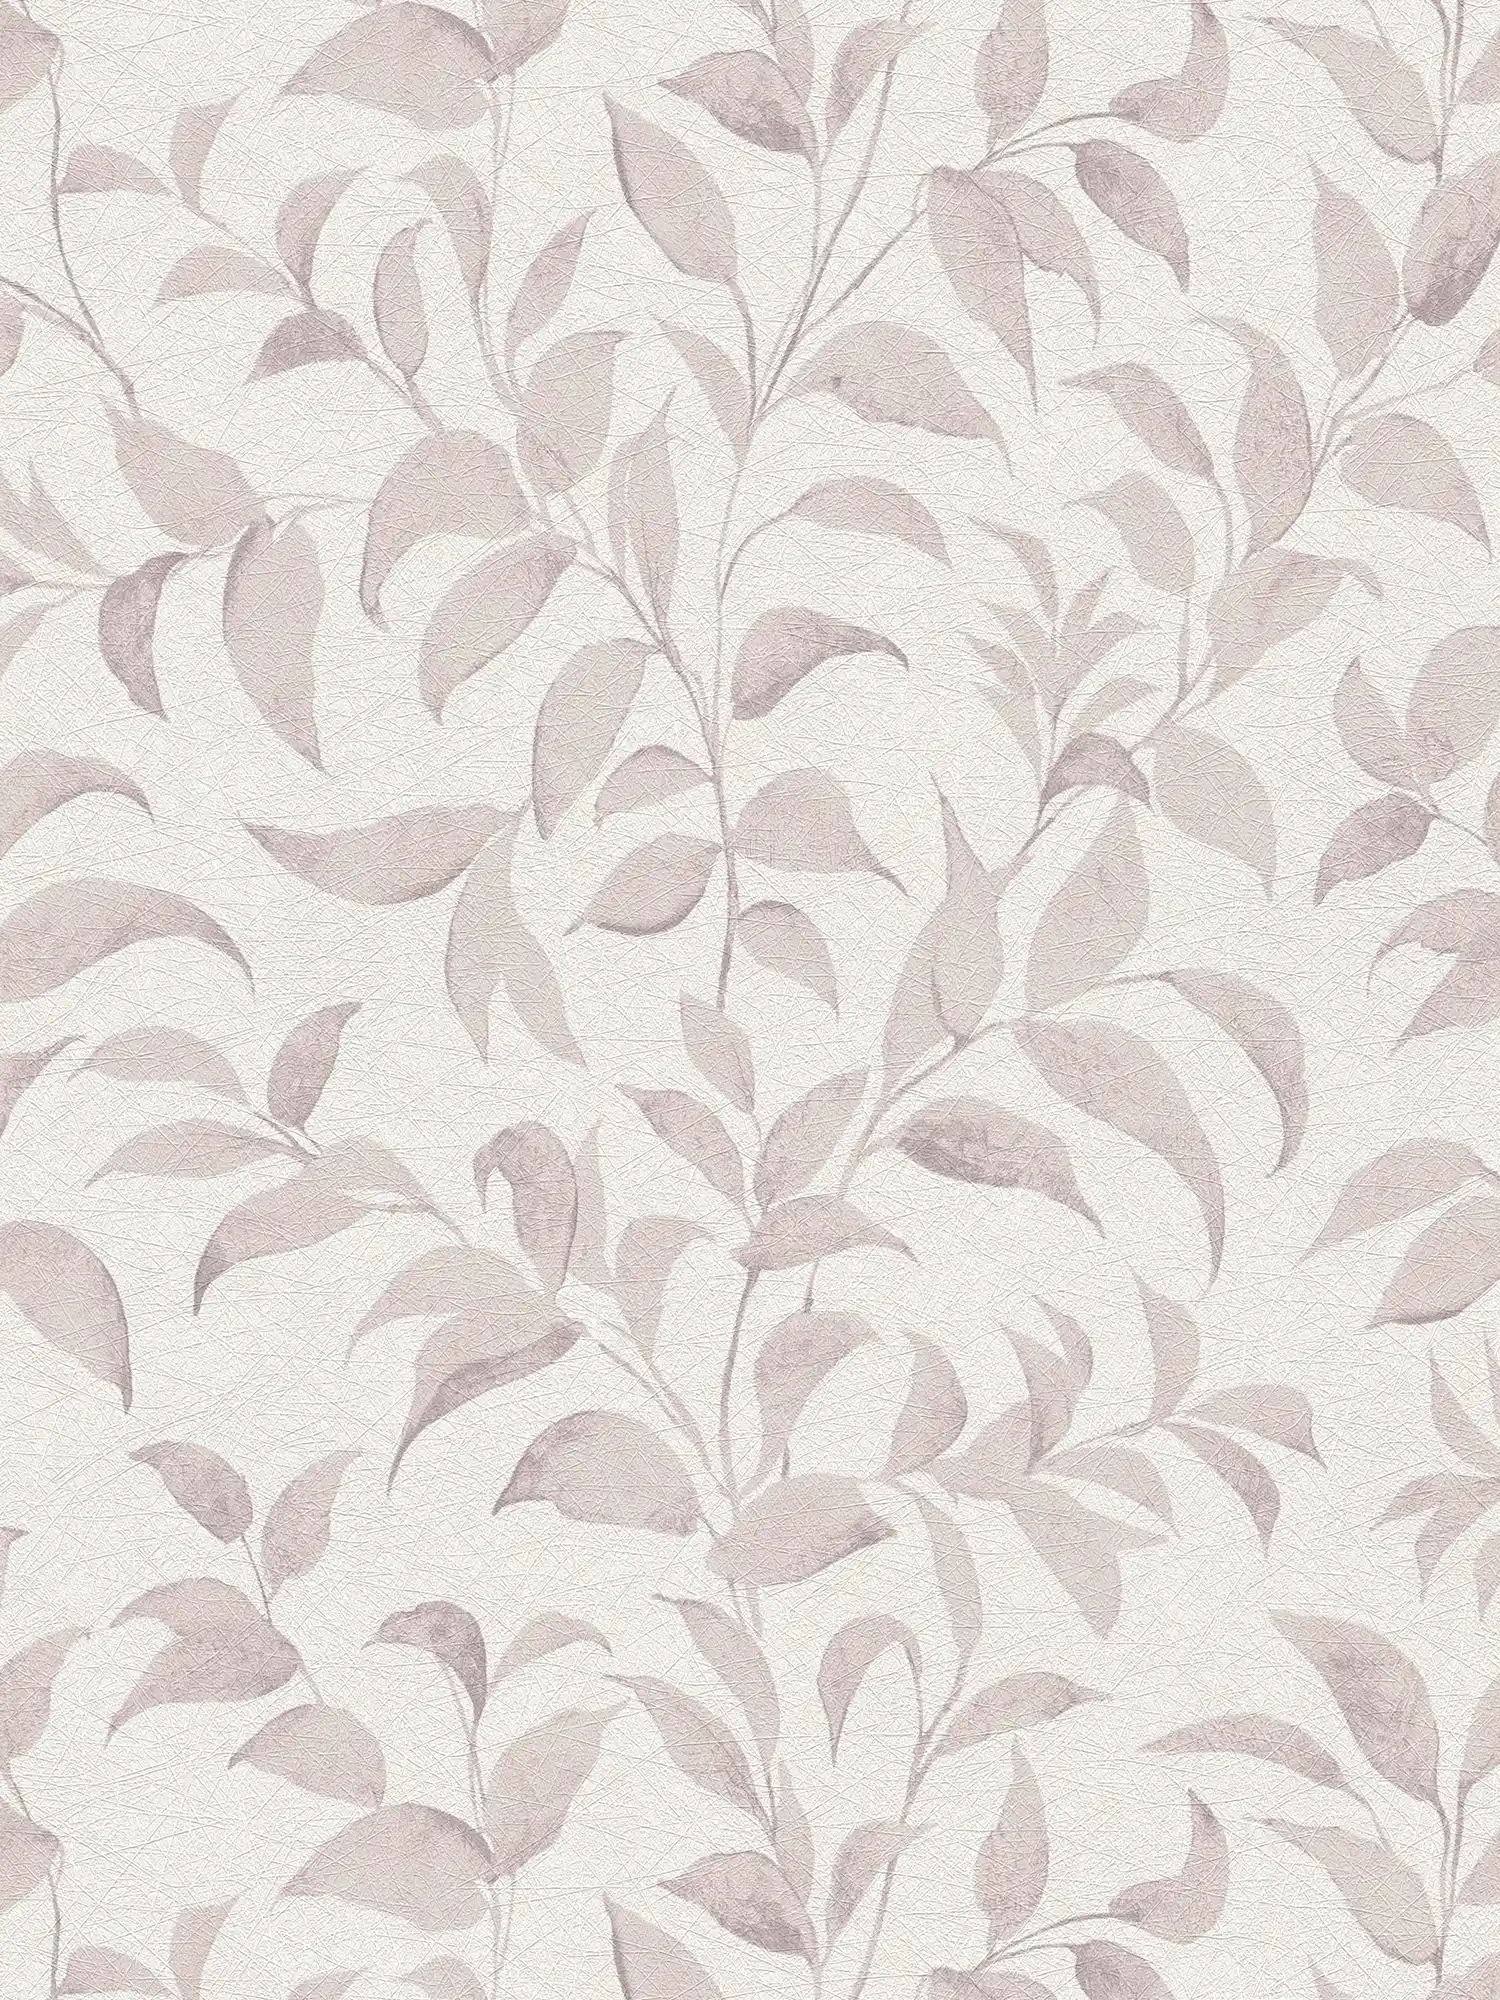 wallpaper floral with leaves shimmer textured - white, beige, grey
